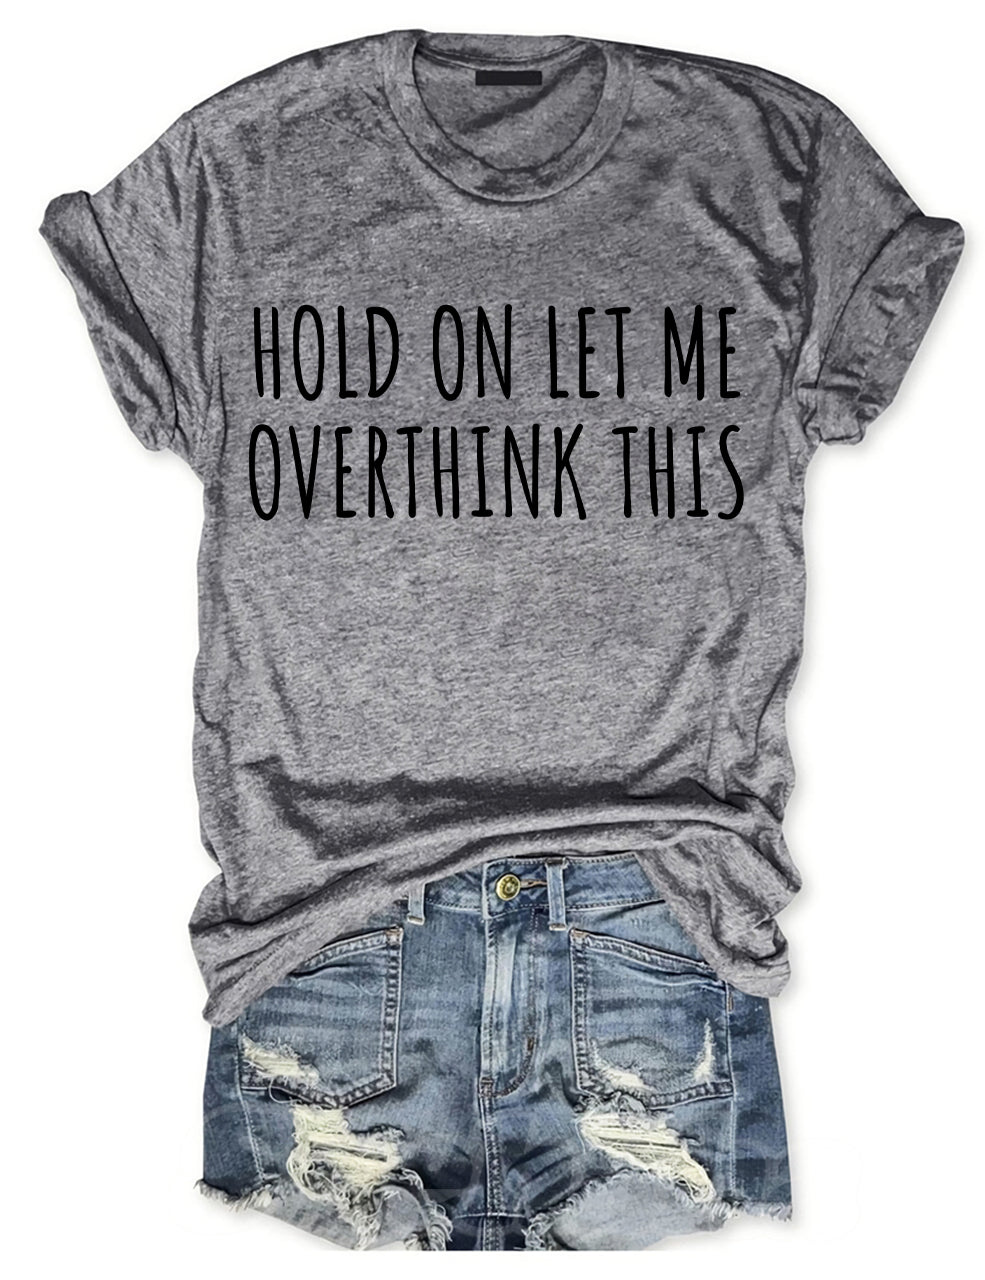 Hold On Let Me Overthink This T-shirt